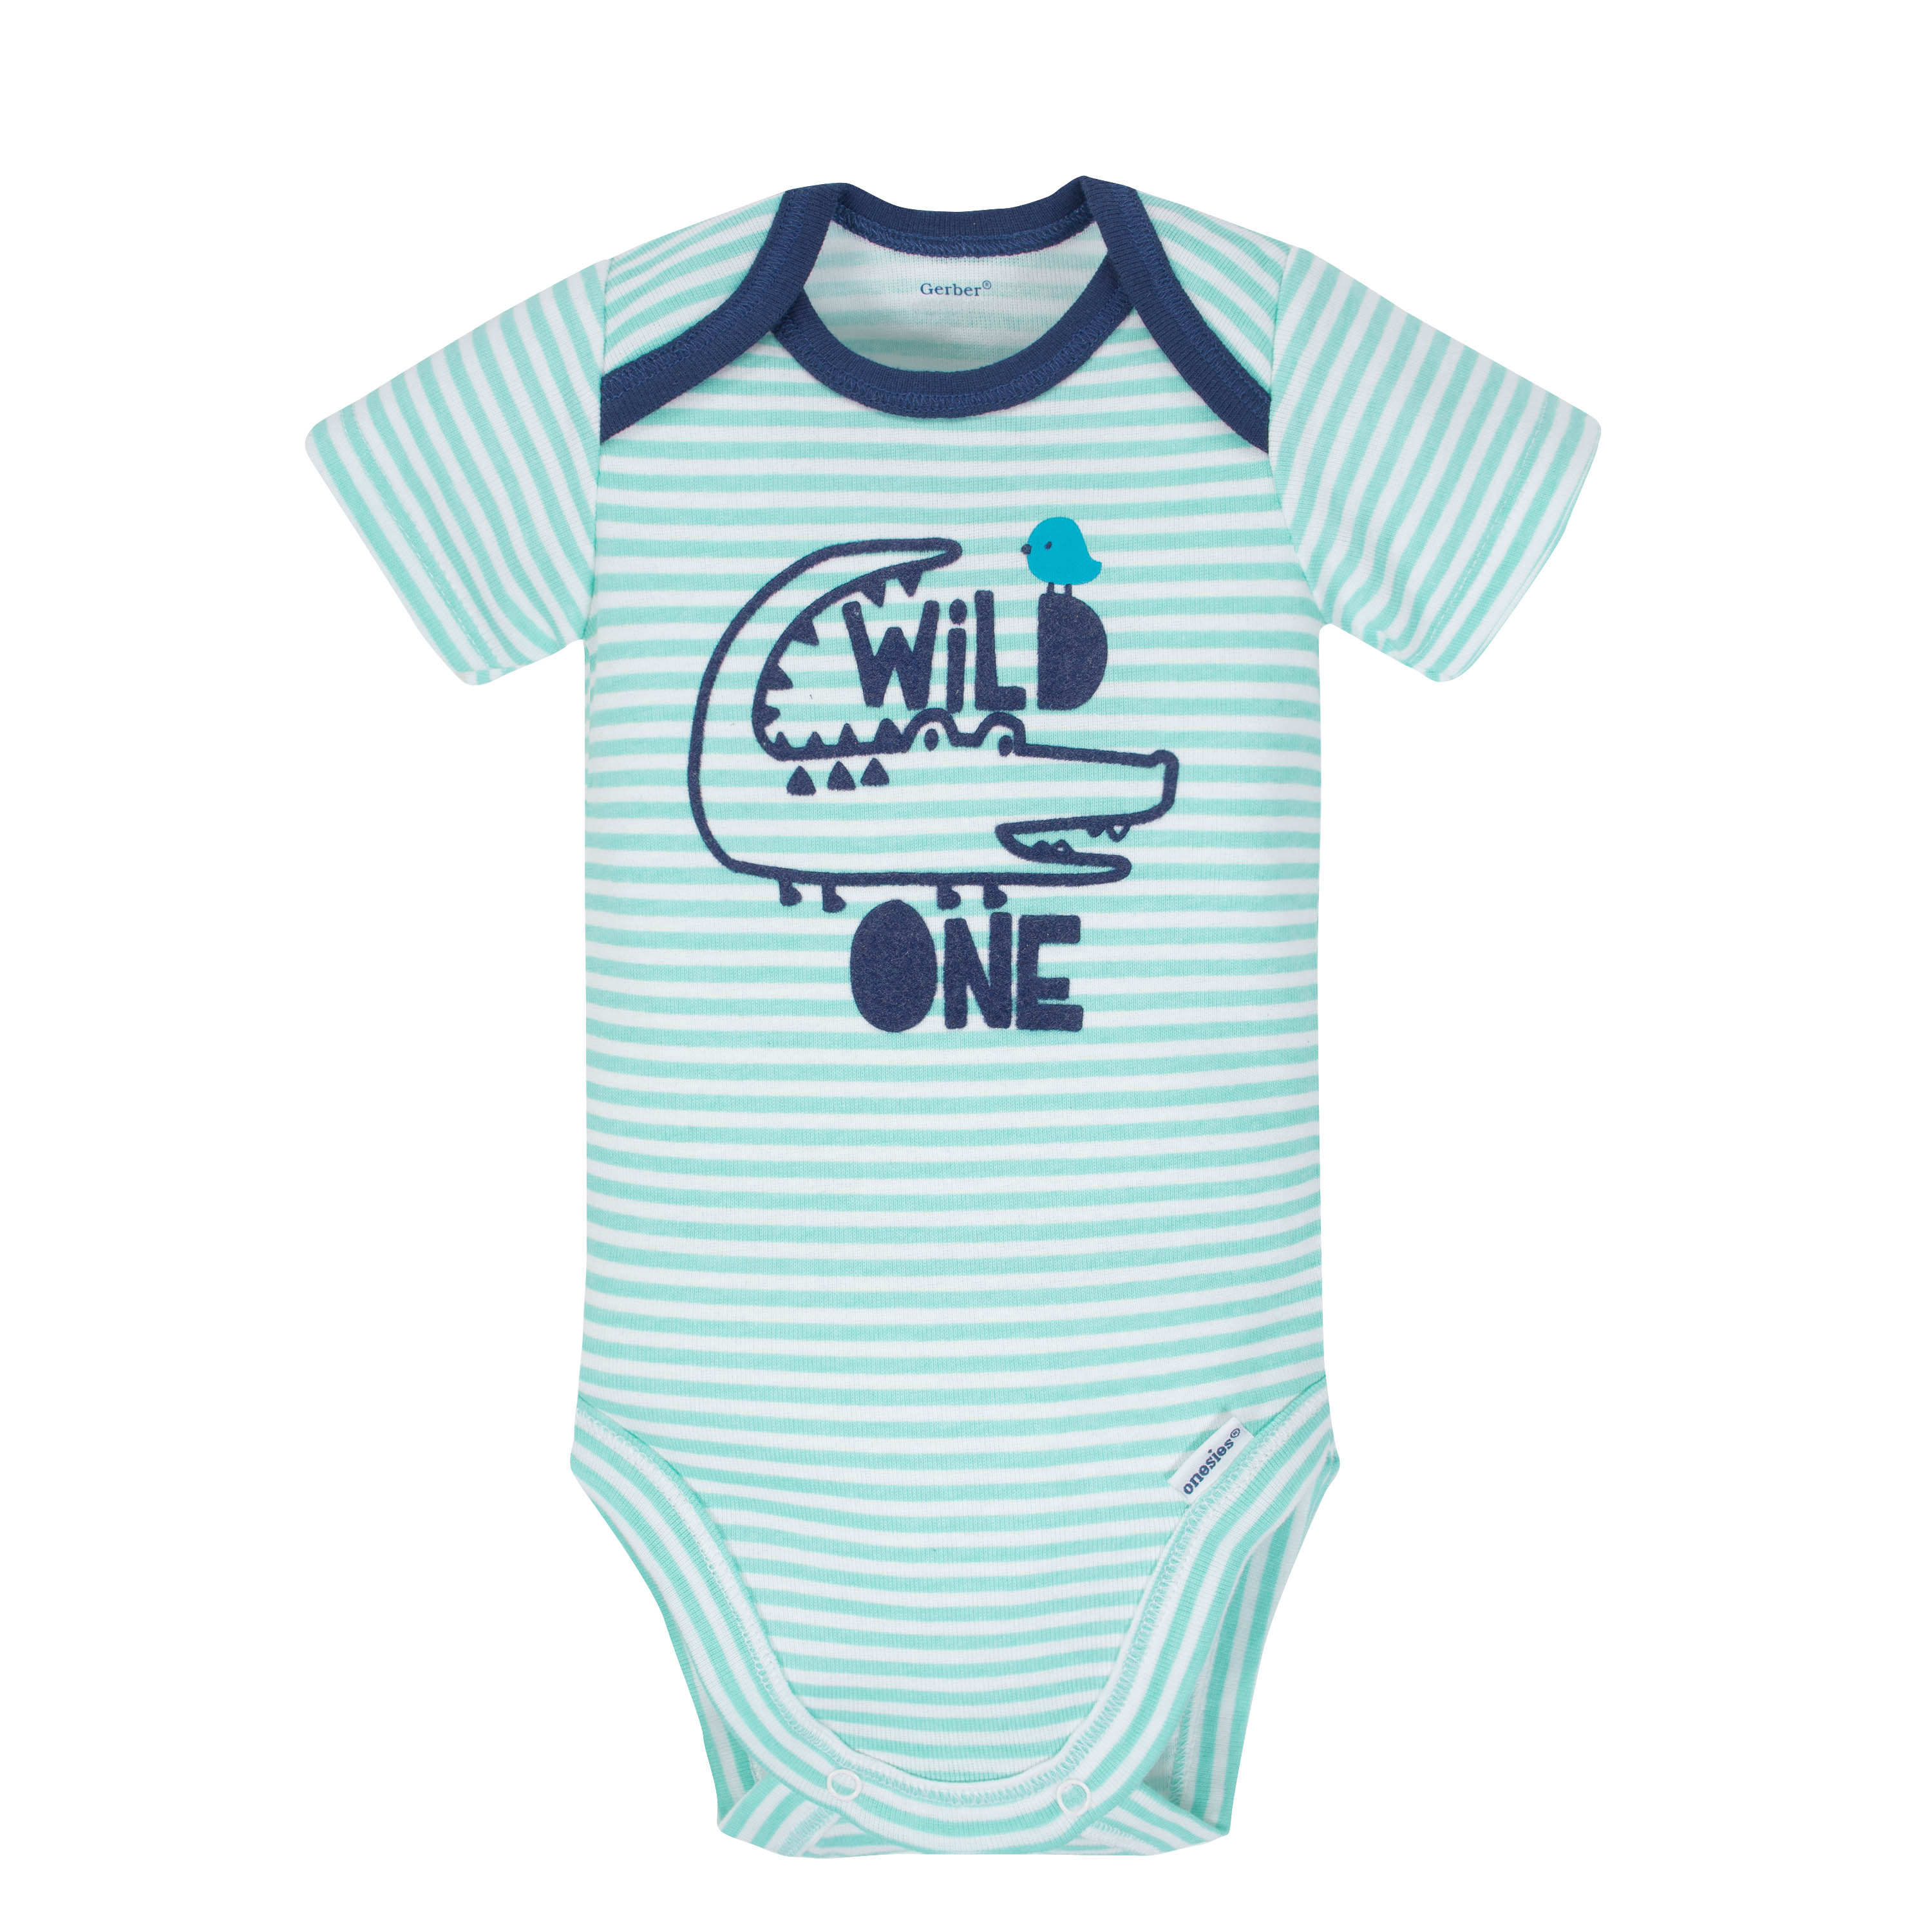 Gerber Onesies Bodysuit, Pants and Cap, 3pc Outfit Set (Baby Boys) - image 3 of 4